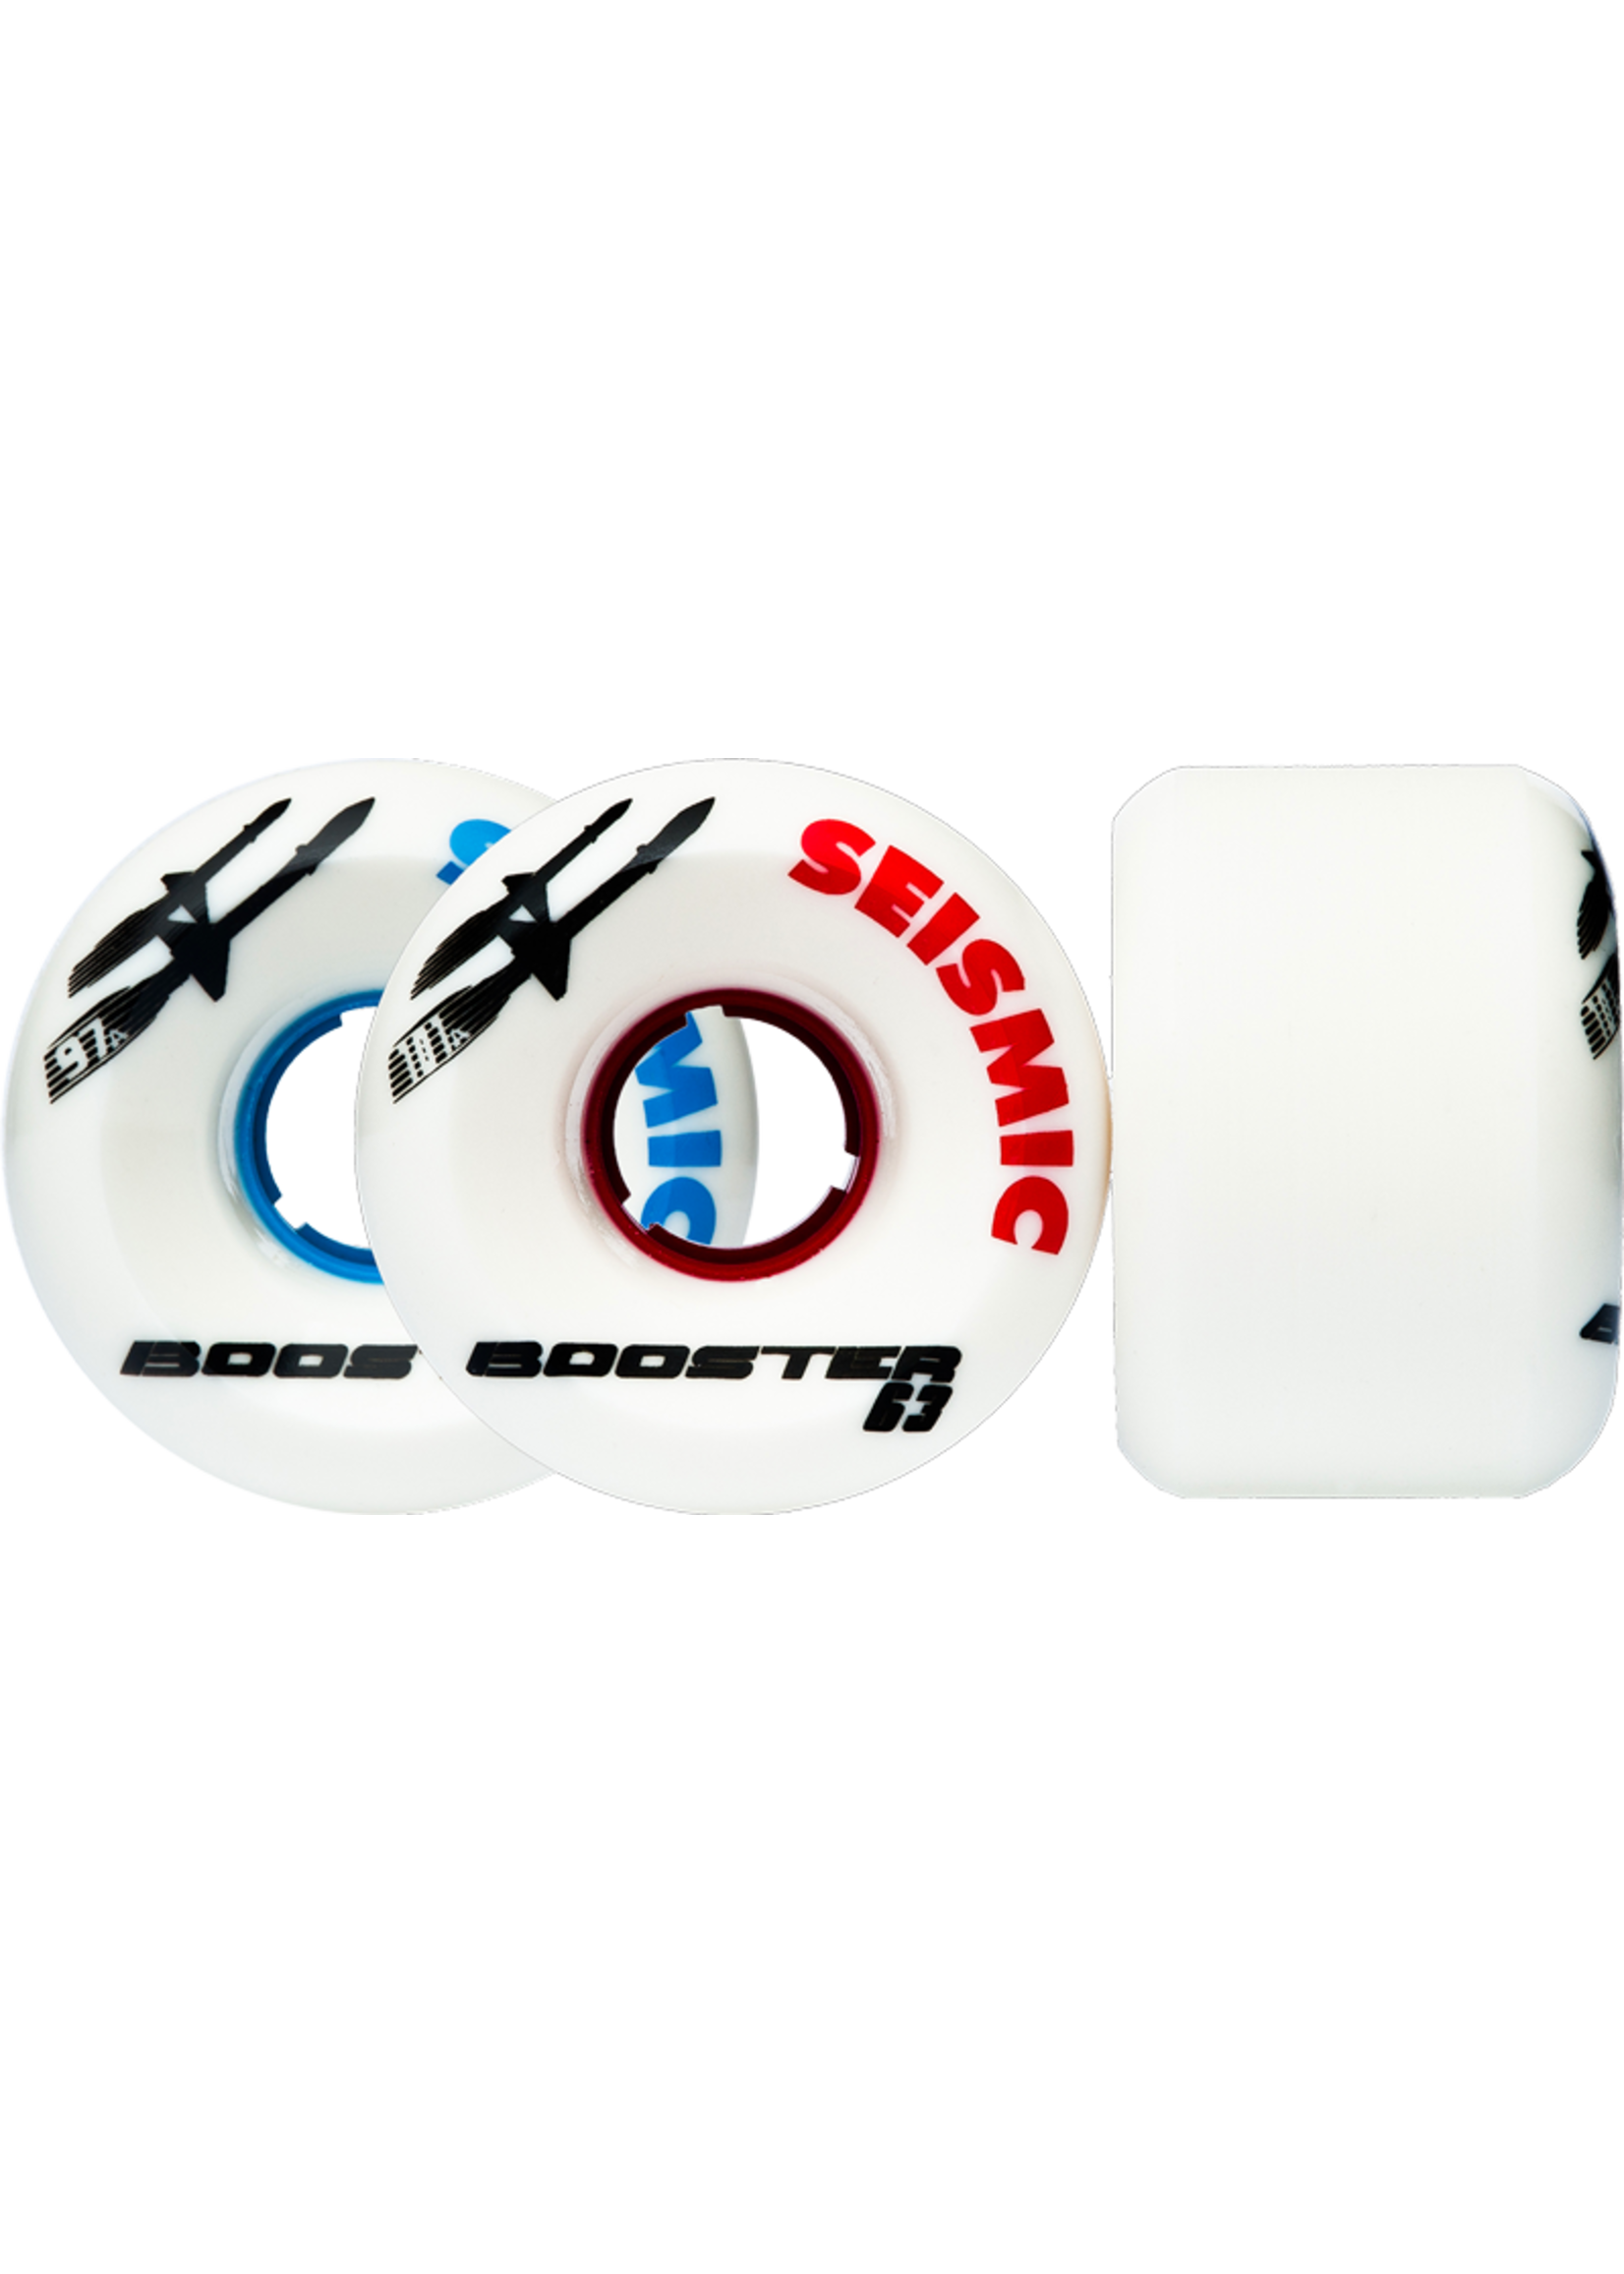 Seismic Skate Systems Booster 63mm